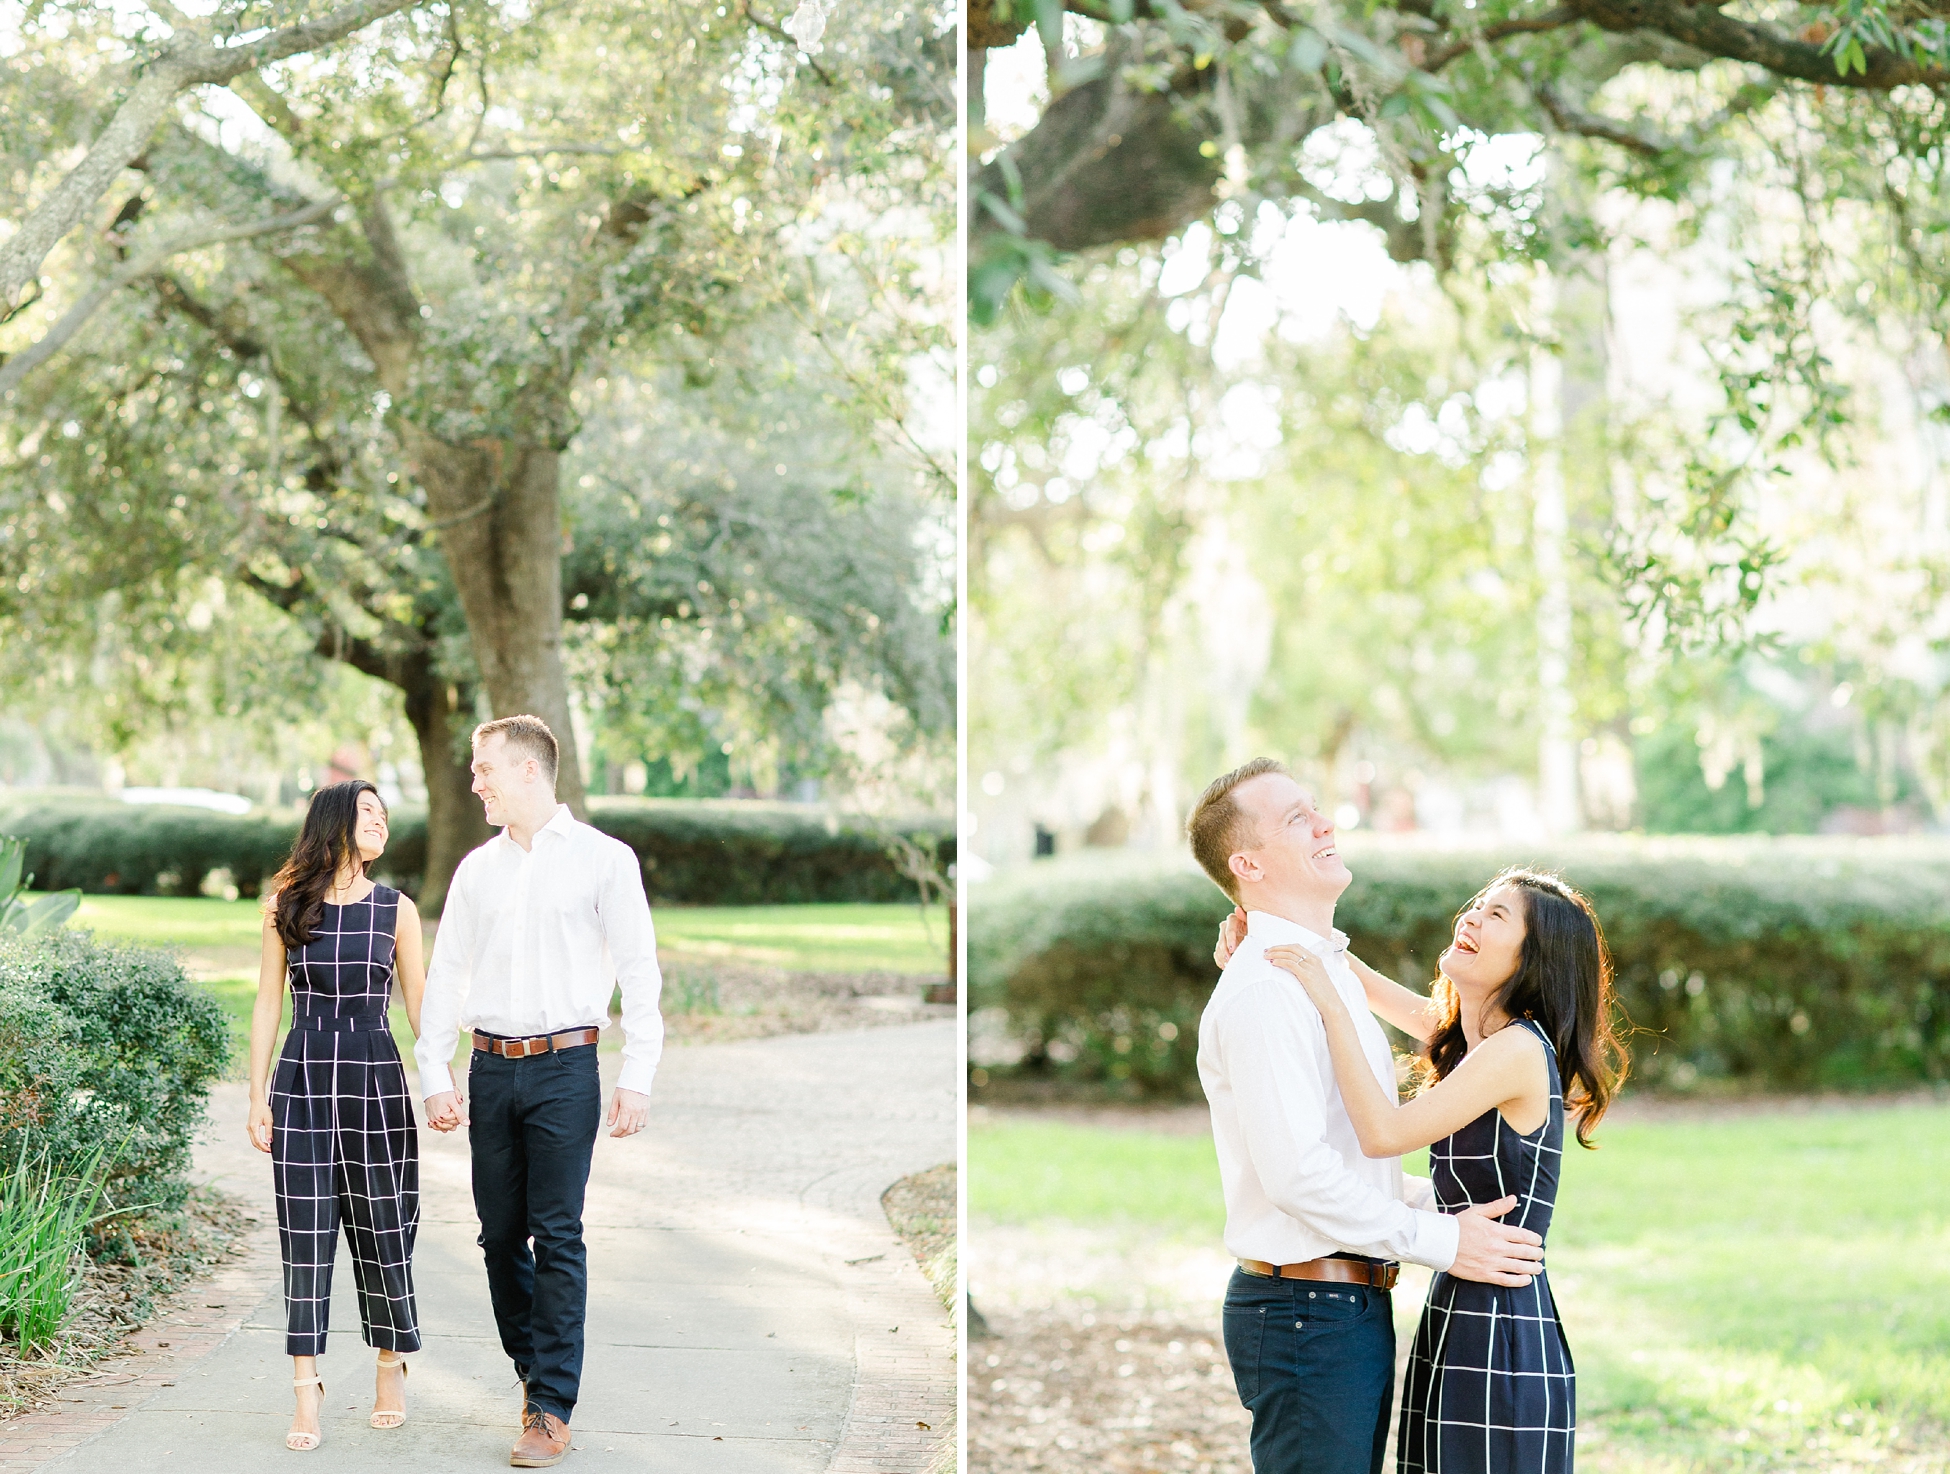 University of Tampa Engagement | © Ailyn La Torre Photography 2018